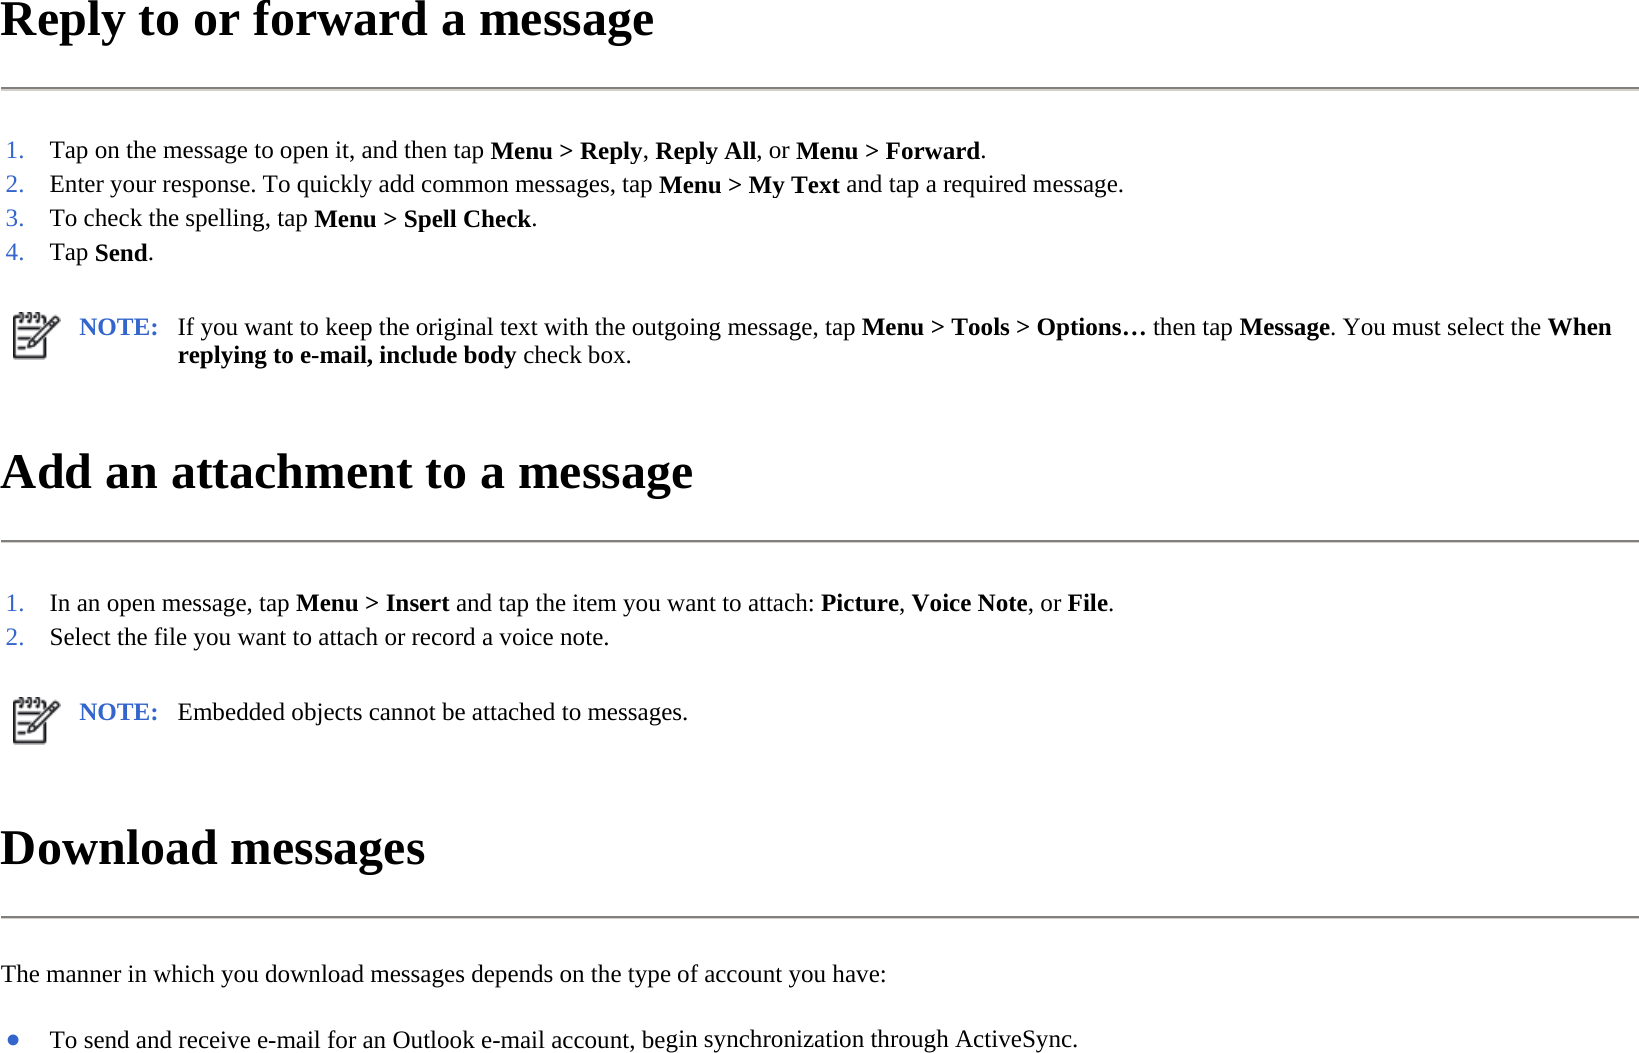 Reply to or forward a message  Add an attachment to a message  Download messages  The manner in which you download messages depends on the type of account you have:  1. Tap on the message to open it, and then tapMenu &gt;Reply,Reply All, orMenu &gt;Forward.2. Enter your response. To quickly add common messages, tapMenu &gt; My Text and tap a required message.3. To check the spelling, tapMenu &gt; Spell Check.4. Tap Send. NOTE: If you want to keep the original text with the outgoing message, tap Menu &gt; Tools &gt; Options… then tap Message. You must select the When replying to e-mail, include body check box.  1. In an open message, tapMenu &gt; Insert and tap the item you want to attach: Picture,Voice Note, orFile.2. Select the file you want to attach or record a voice note.NOTE: Embedded objects cannot be attached to messages. ●To send and receive e-mail for an Outlook e-mail account, begin synchronization through ActiveSync.